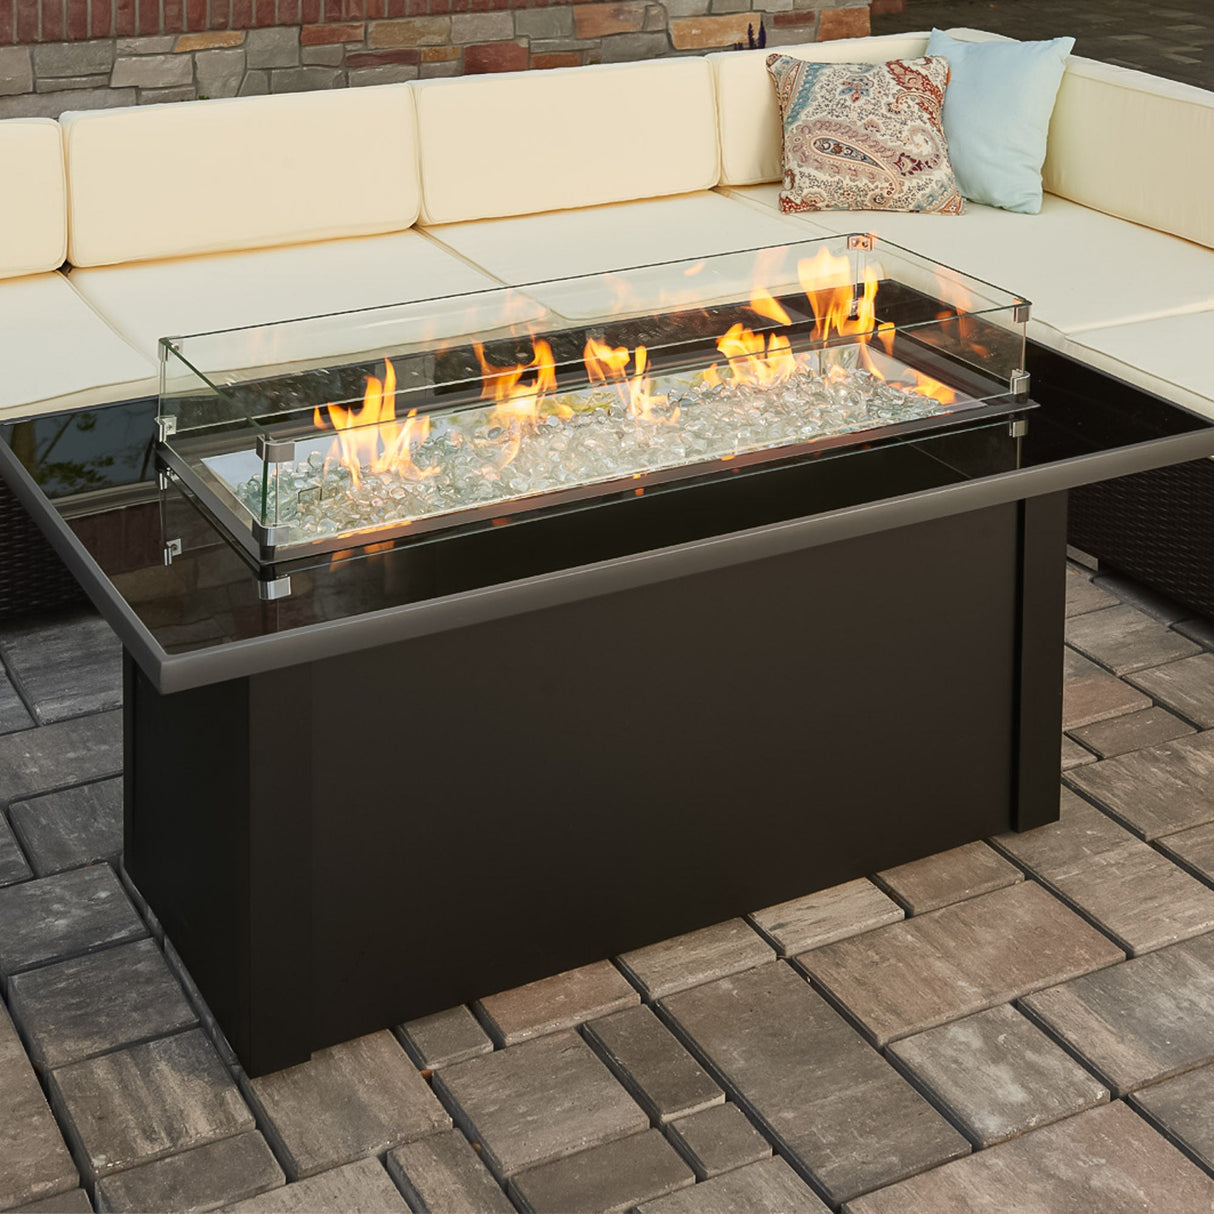 A glass wind guard placed on top of the Monte Carlo Linear Gas Fire Pit Table to protect the flame from the wind